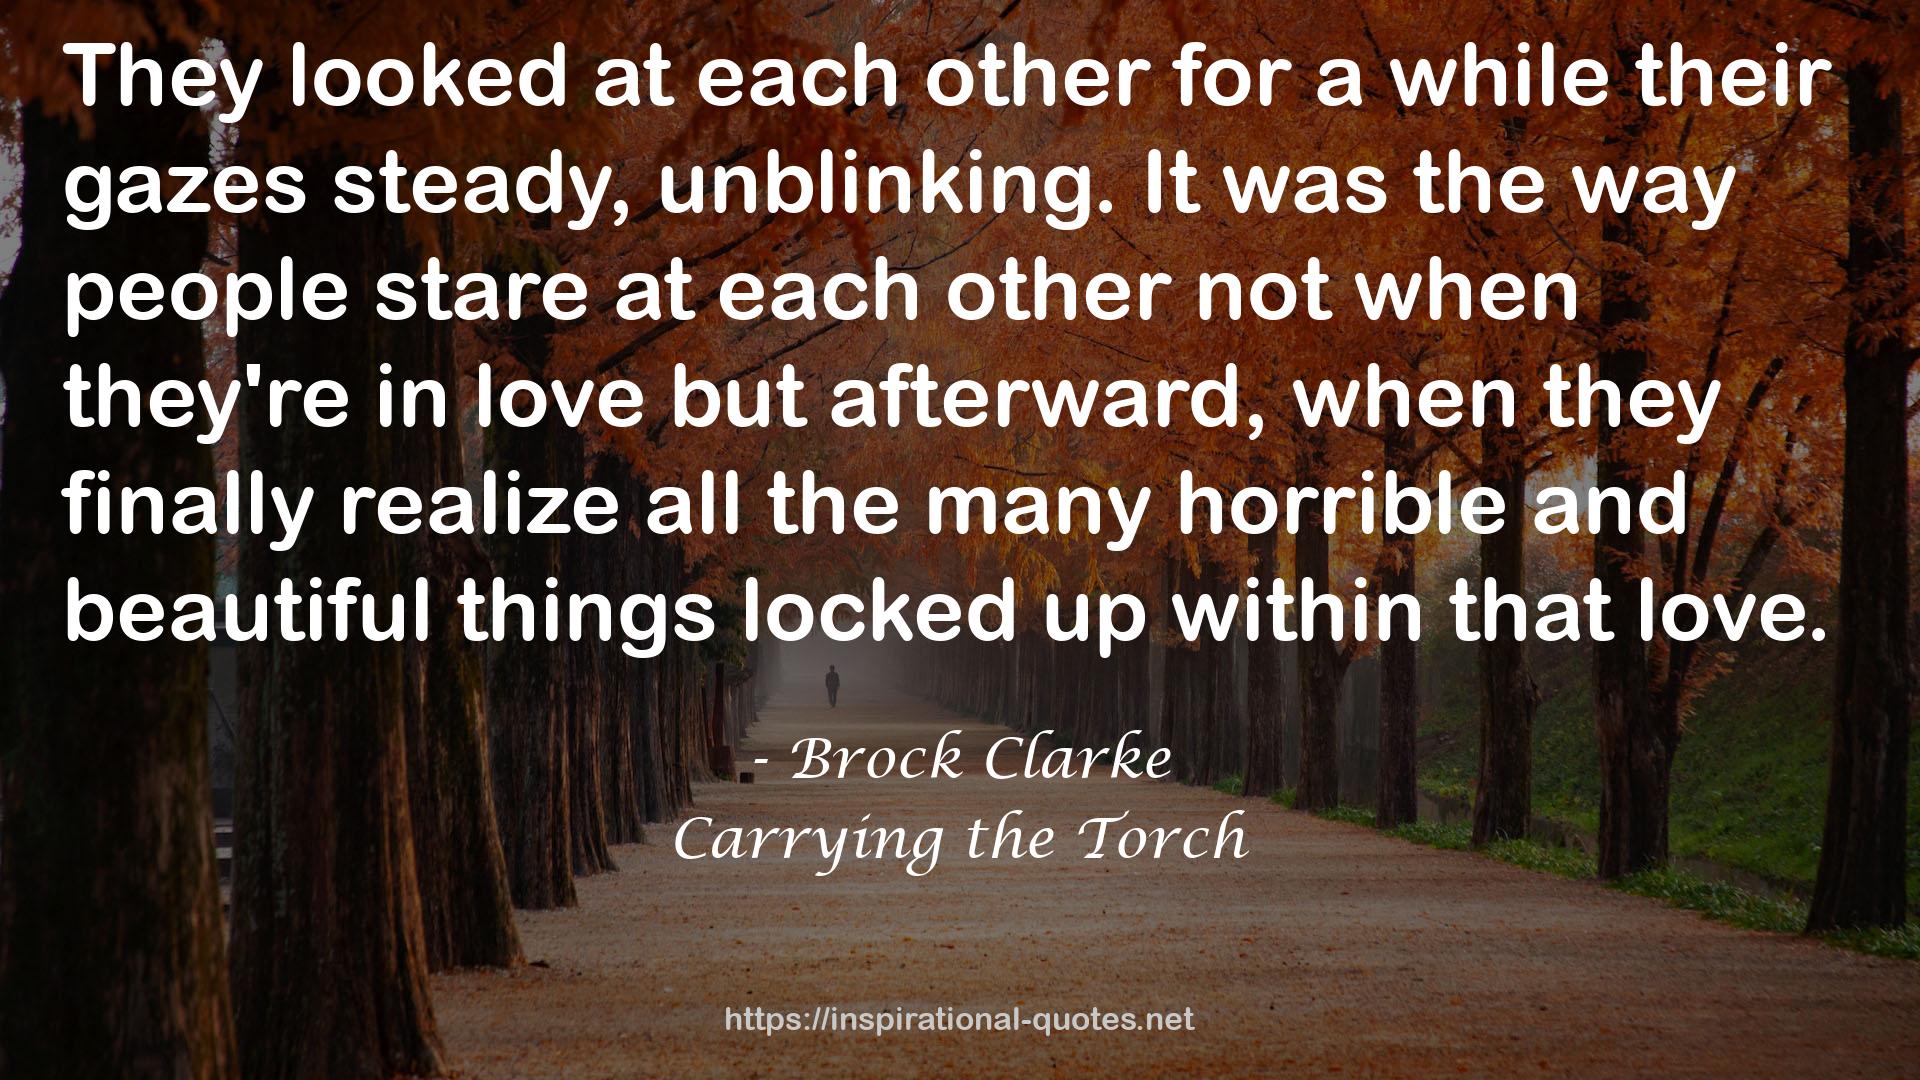 Carrying the Torch QUOTES